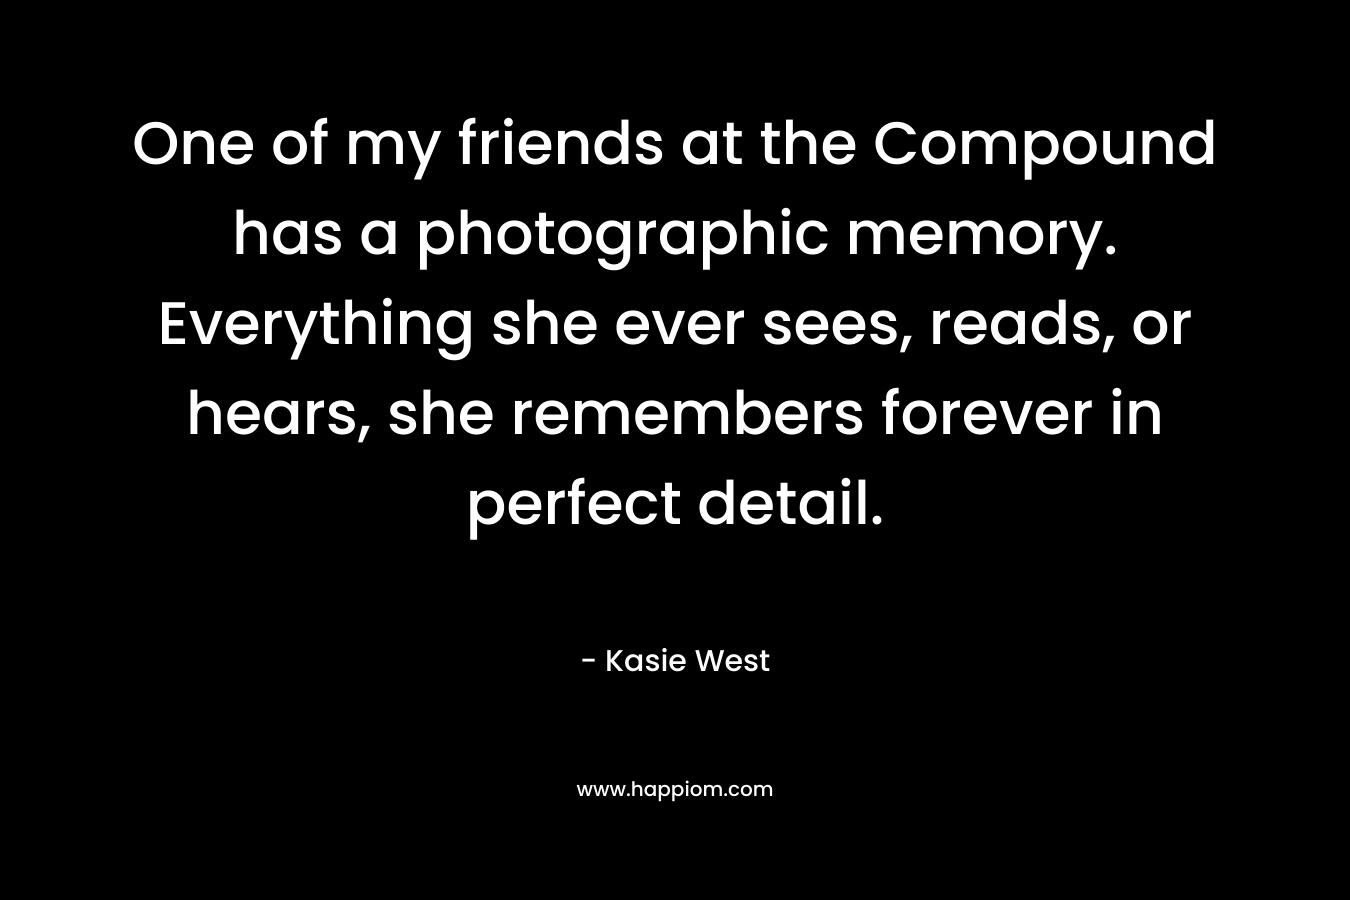 One of my friends at the Compound has a photographic memory. Everything she ever sees, reads, or hears, she remembers forever in perfect detail. – Kasie West